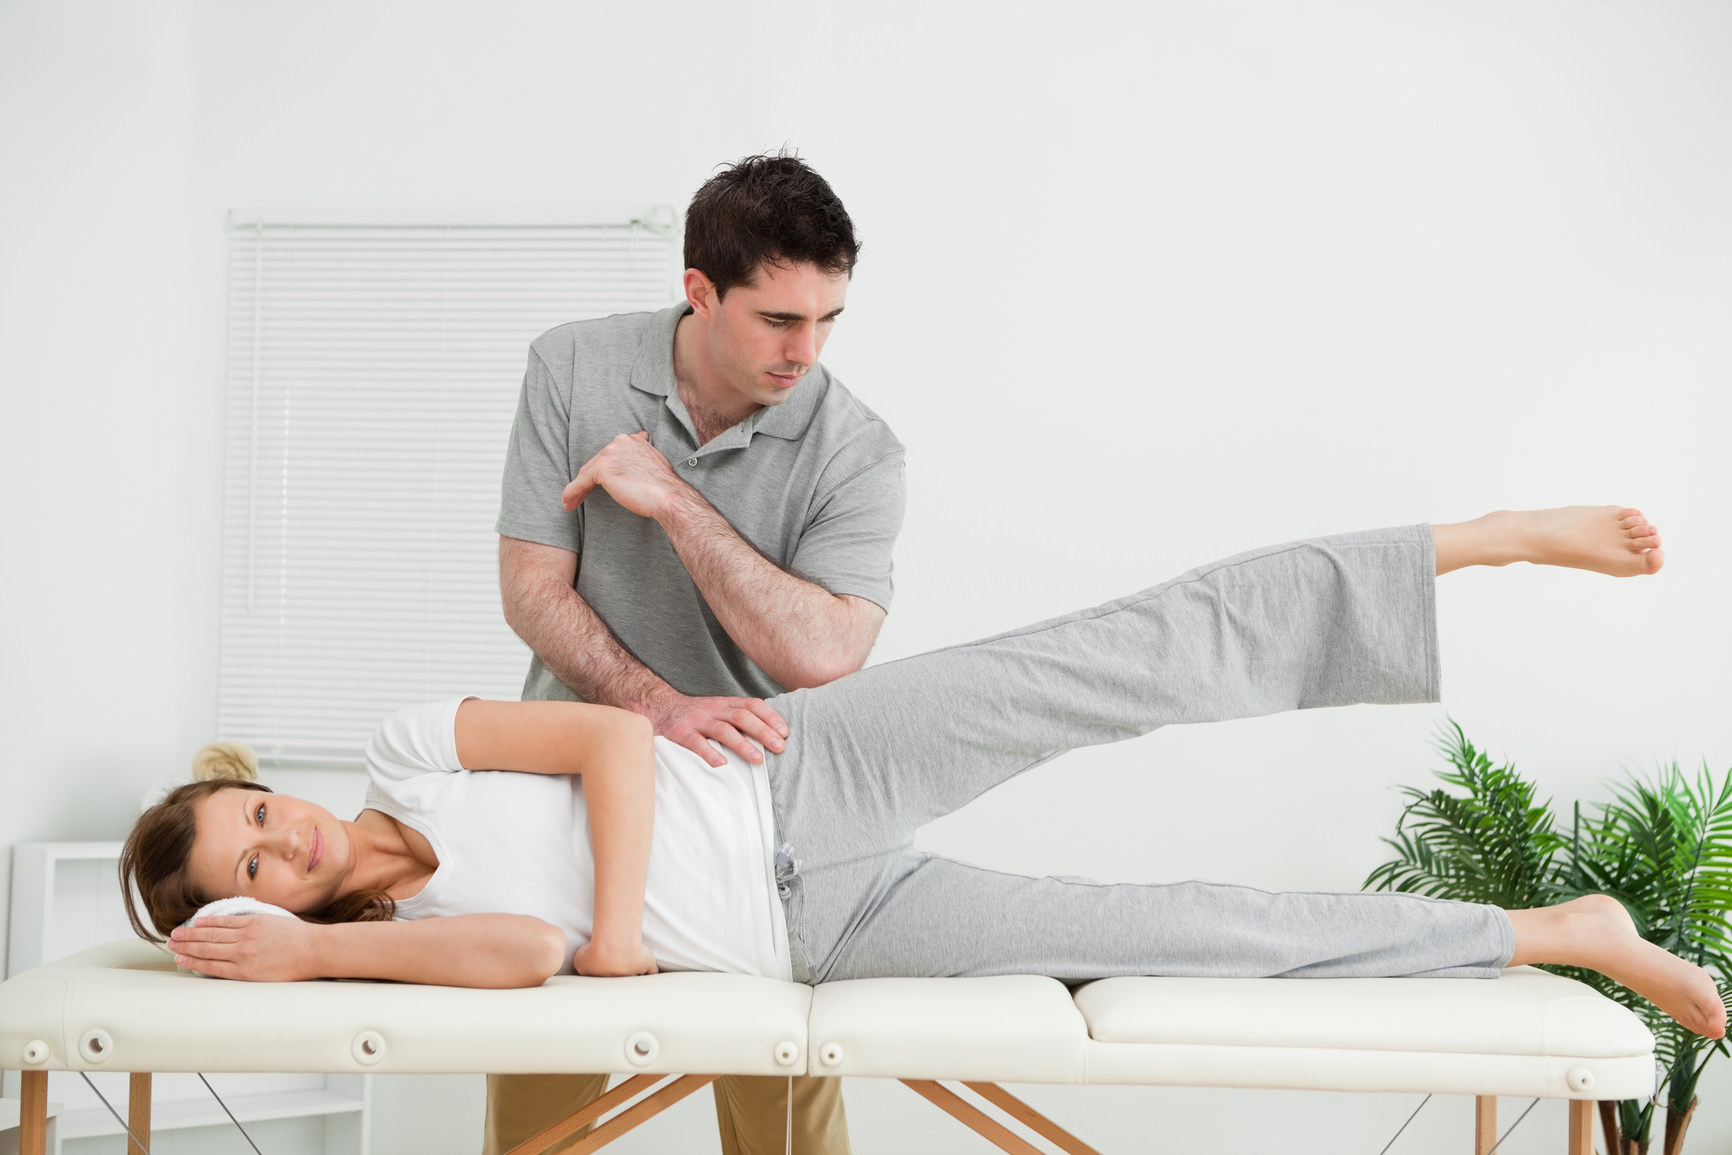 Doctor pressing his elbow on her hip while woman raising her leg in a room